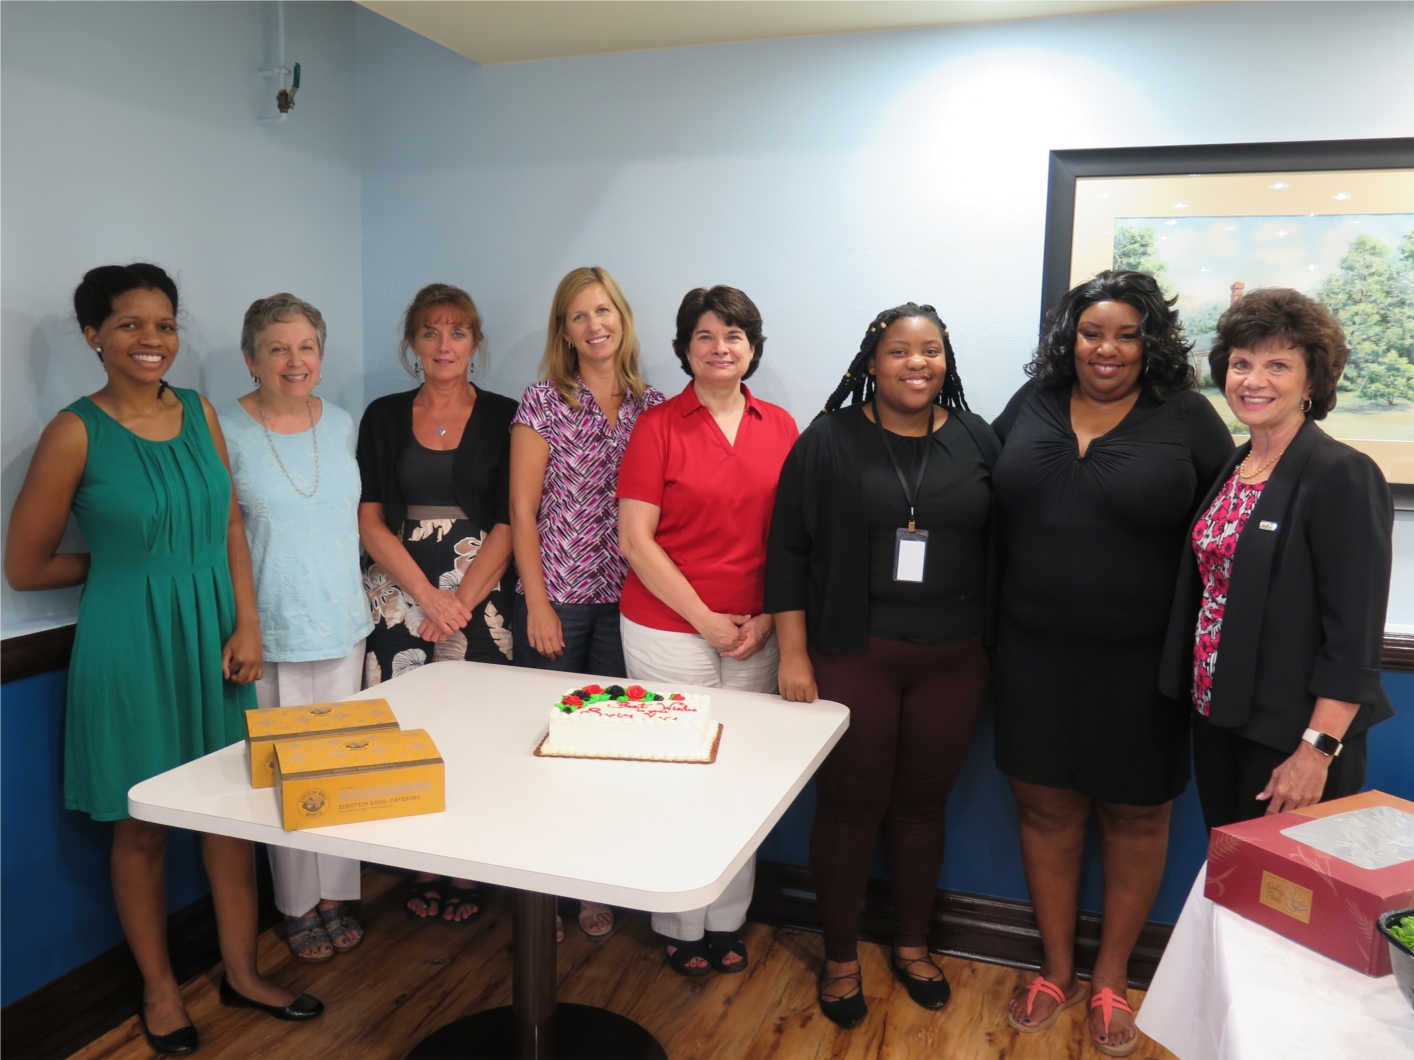 Employees from our accounting and treasury department congratulate our summer intern and wish her well in school as the semester begins. 